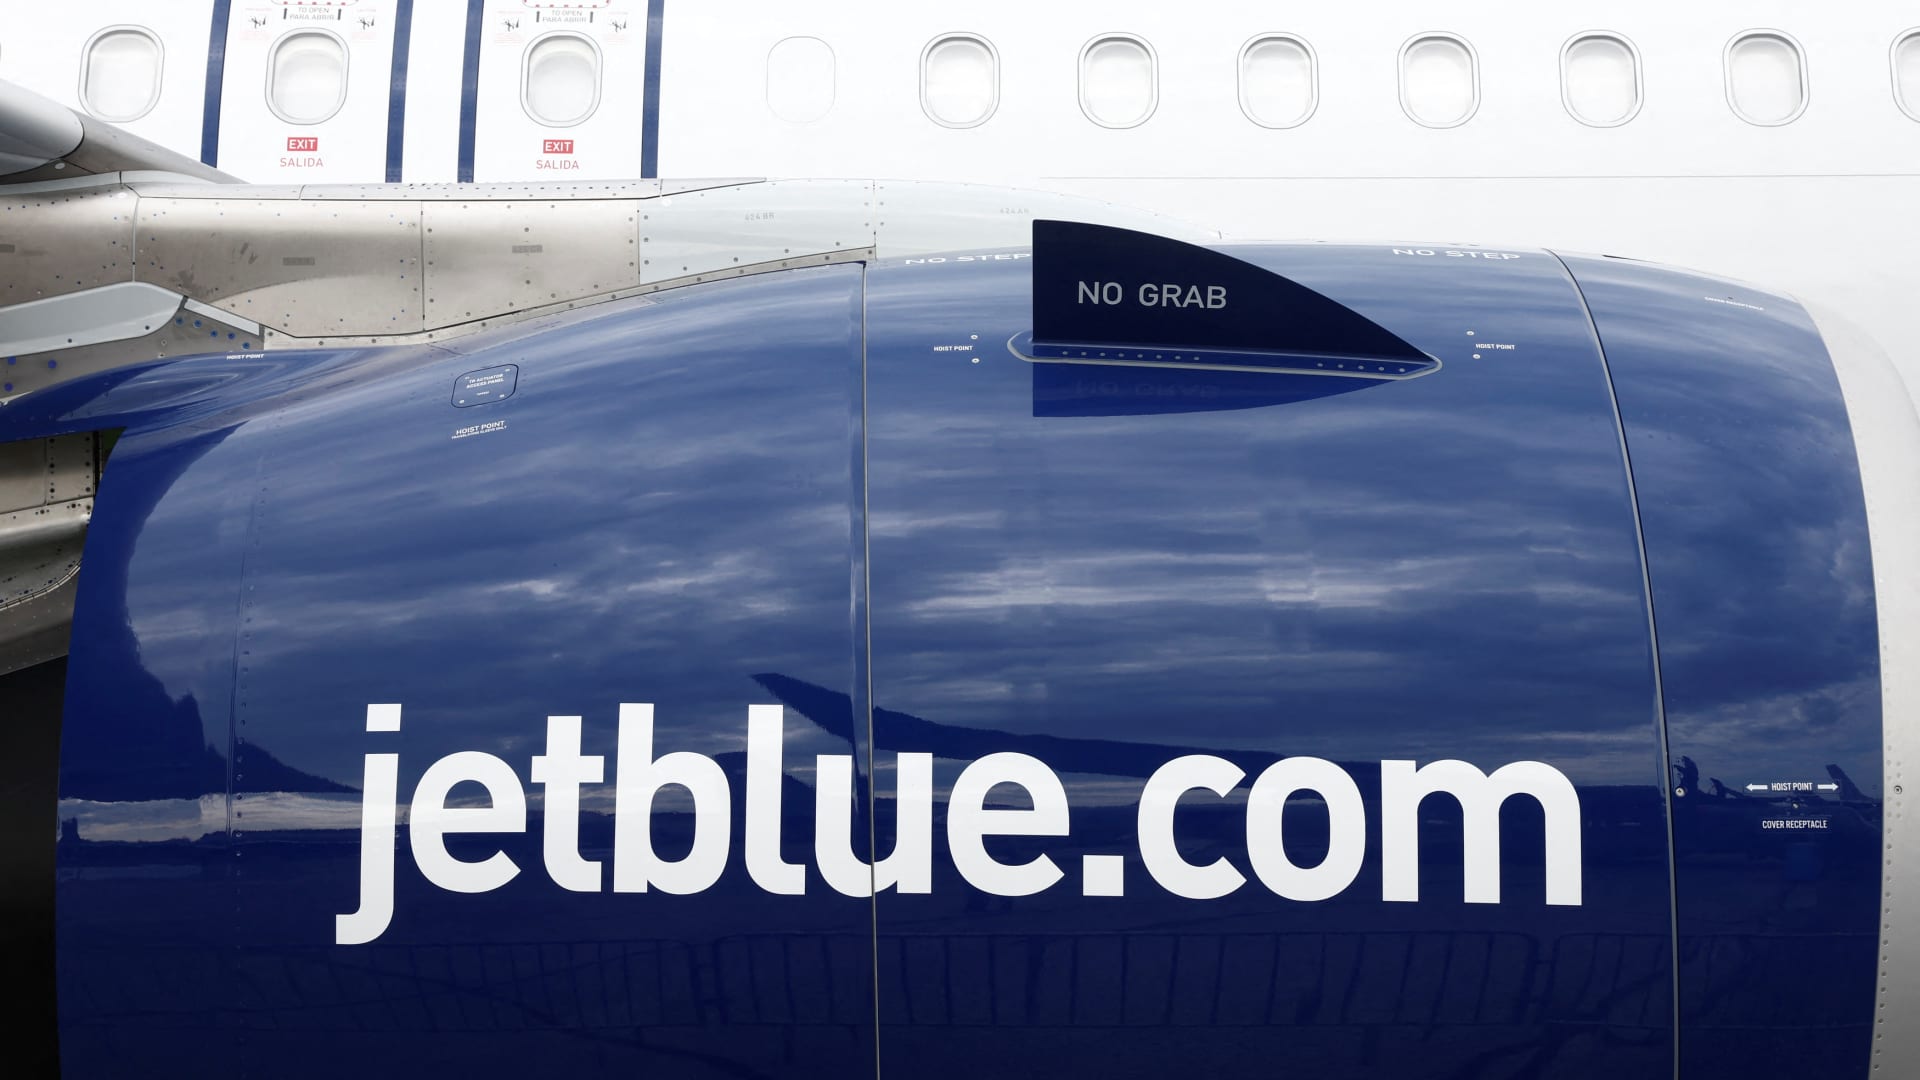 Carl Icahn gets two seats on JetBlue’s board. Here’s how he may help build value